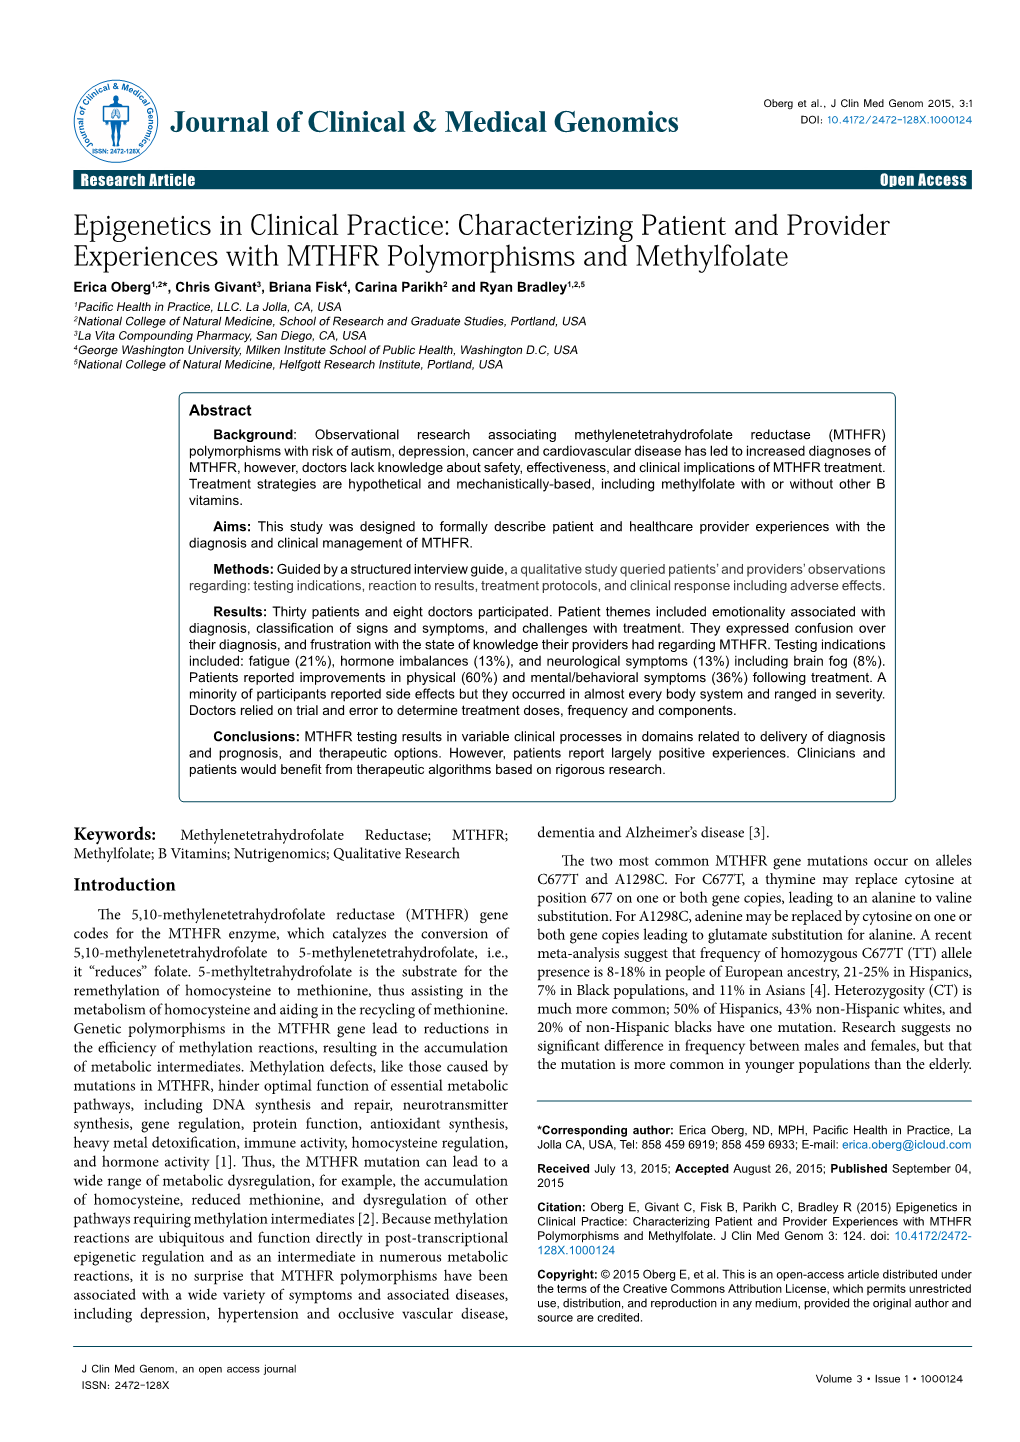 Characterizing Patient and Provider Experiences with MTHFR